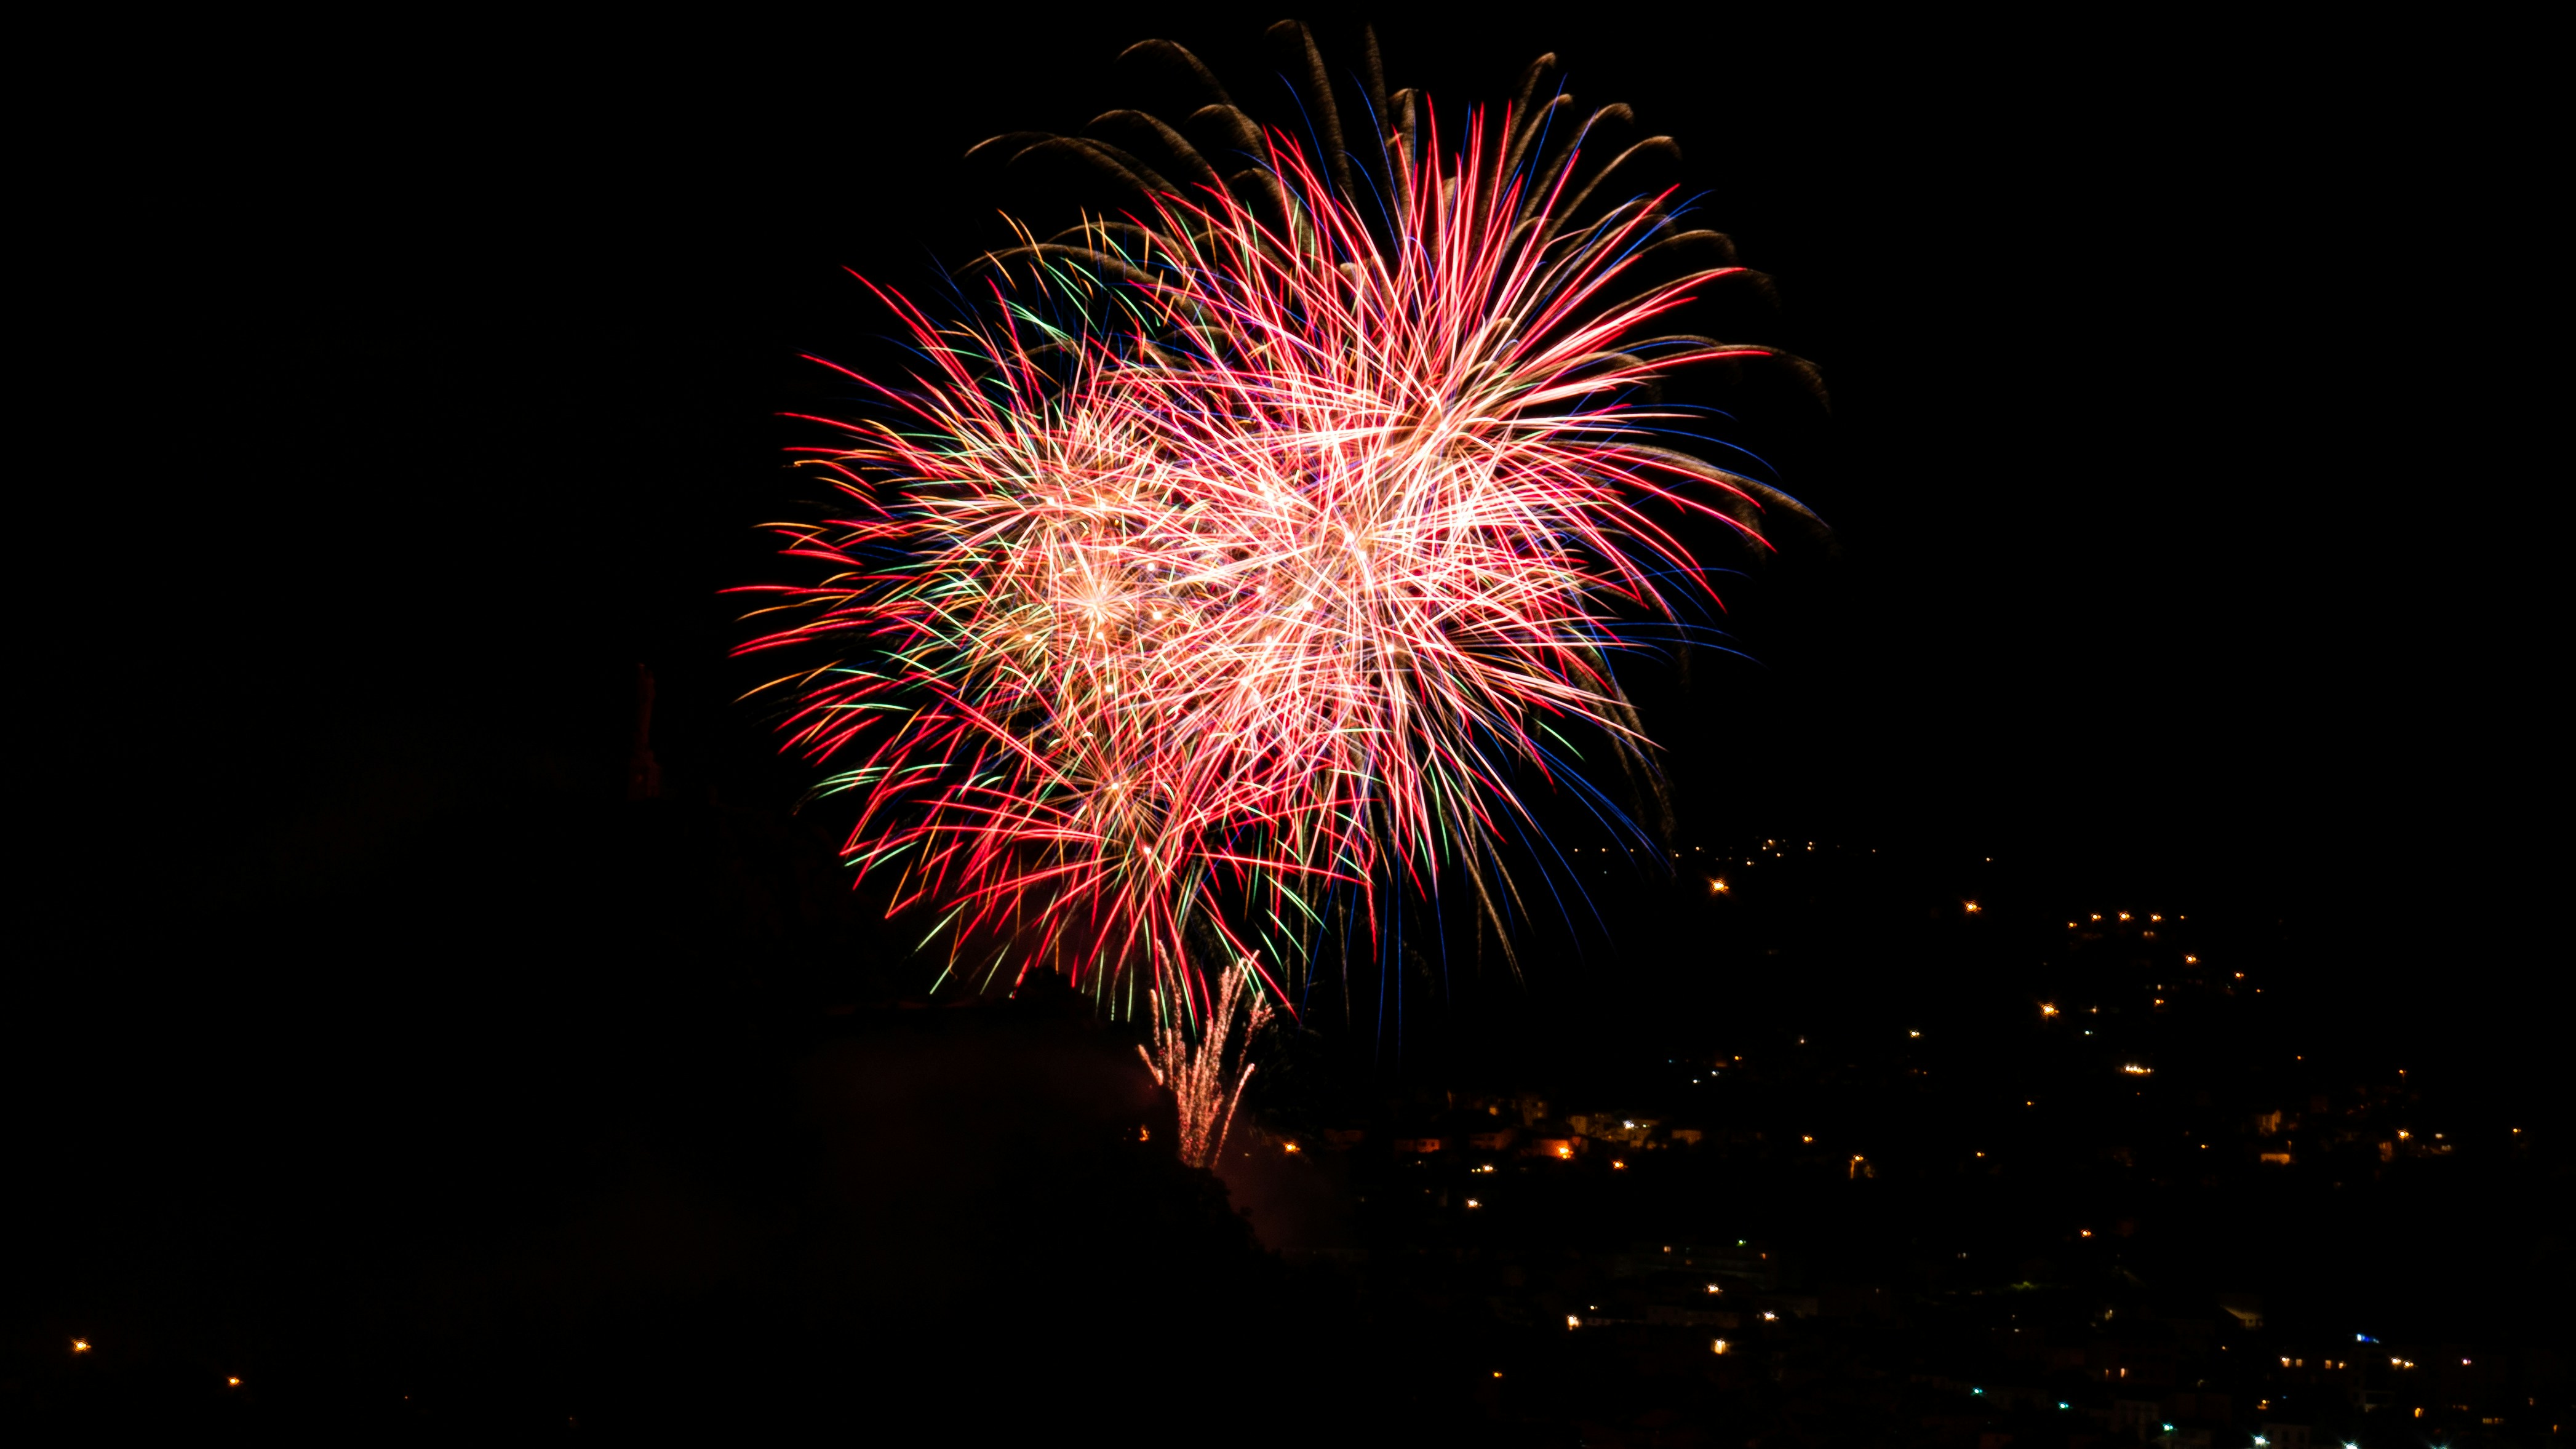 red and white fireworks display during night time